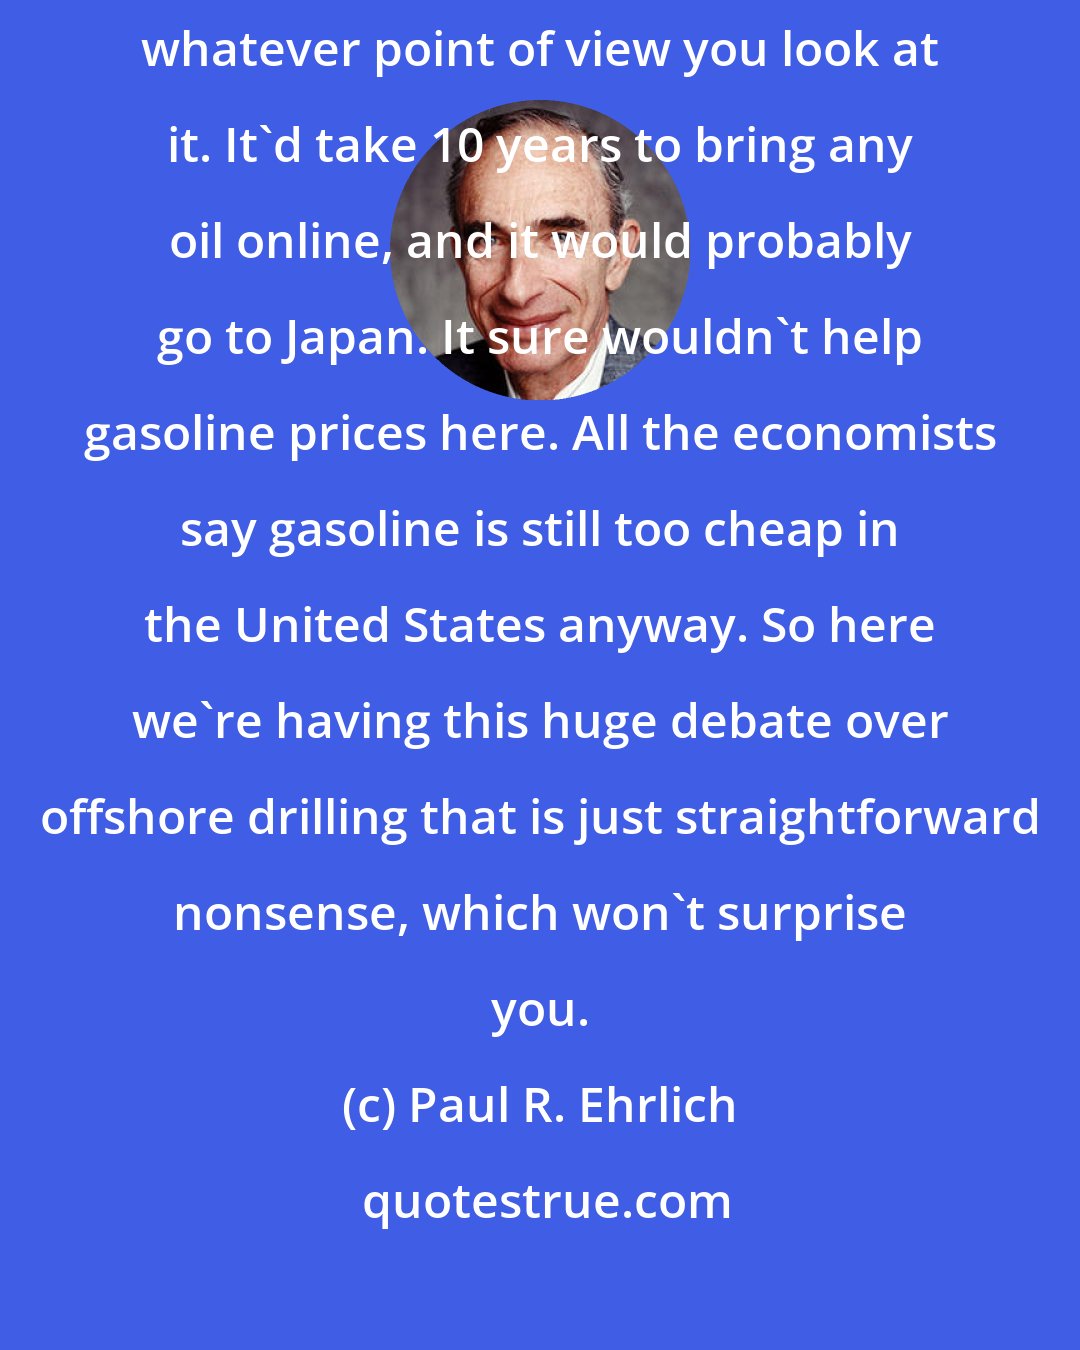 Paul R. Ehrlich: The drilling idea is spherically senseless - it's senseless from whatever point of view you look at it. It'd take 10 years to bring any oil online, and it would probably go to Japan. It sure wouldn't help gasoline prices here. All the economists say gasoline is still too cheap in the United States anyway. So here we're having this huge debate over offshore drilling that is just straightforward nonsense, which won't surprise you.